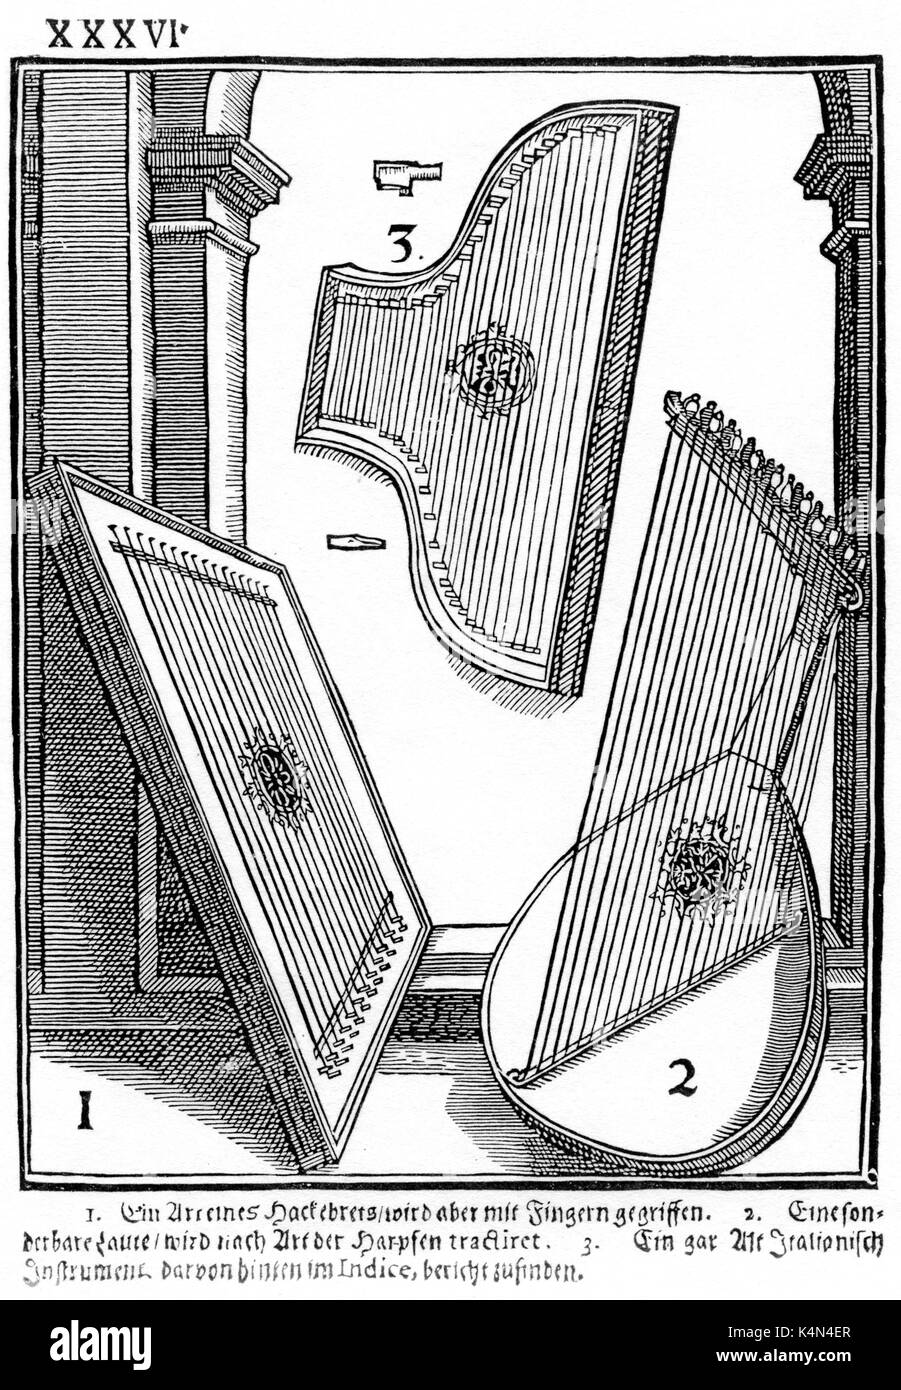 Woodcut from Praetorius's 'Syntagma Musicum' showing 1. Dulcimer (played with fingers), 2. Harp-lute, 3. 'Old Italian Instrument'.   16th century Renaissance. German musician, composer and theorist, 15 February 1571 - 15 February 1621. Stock Photo